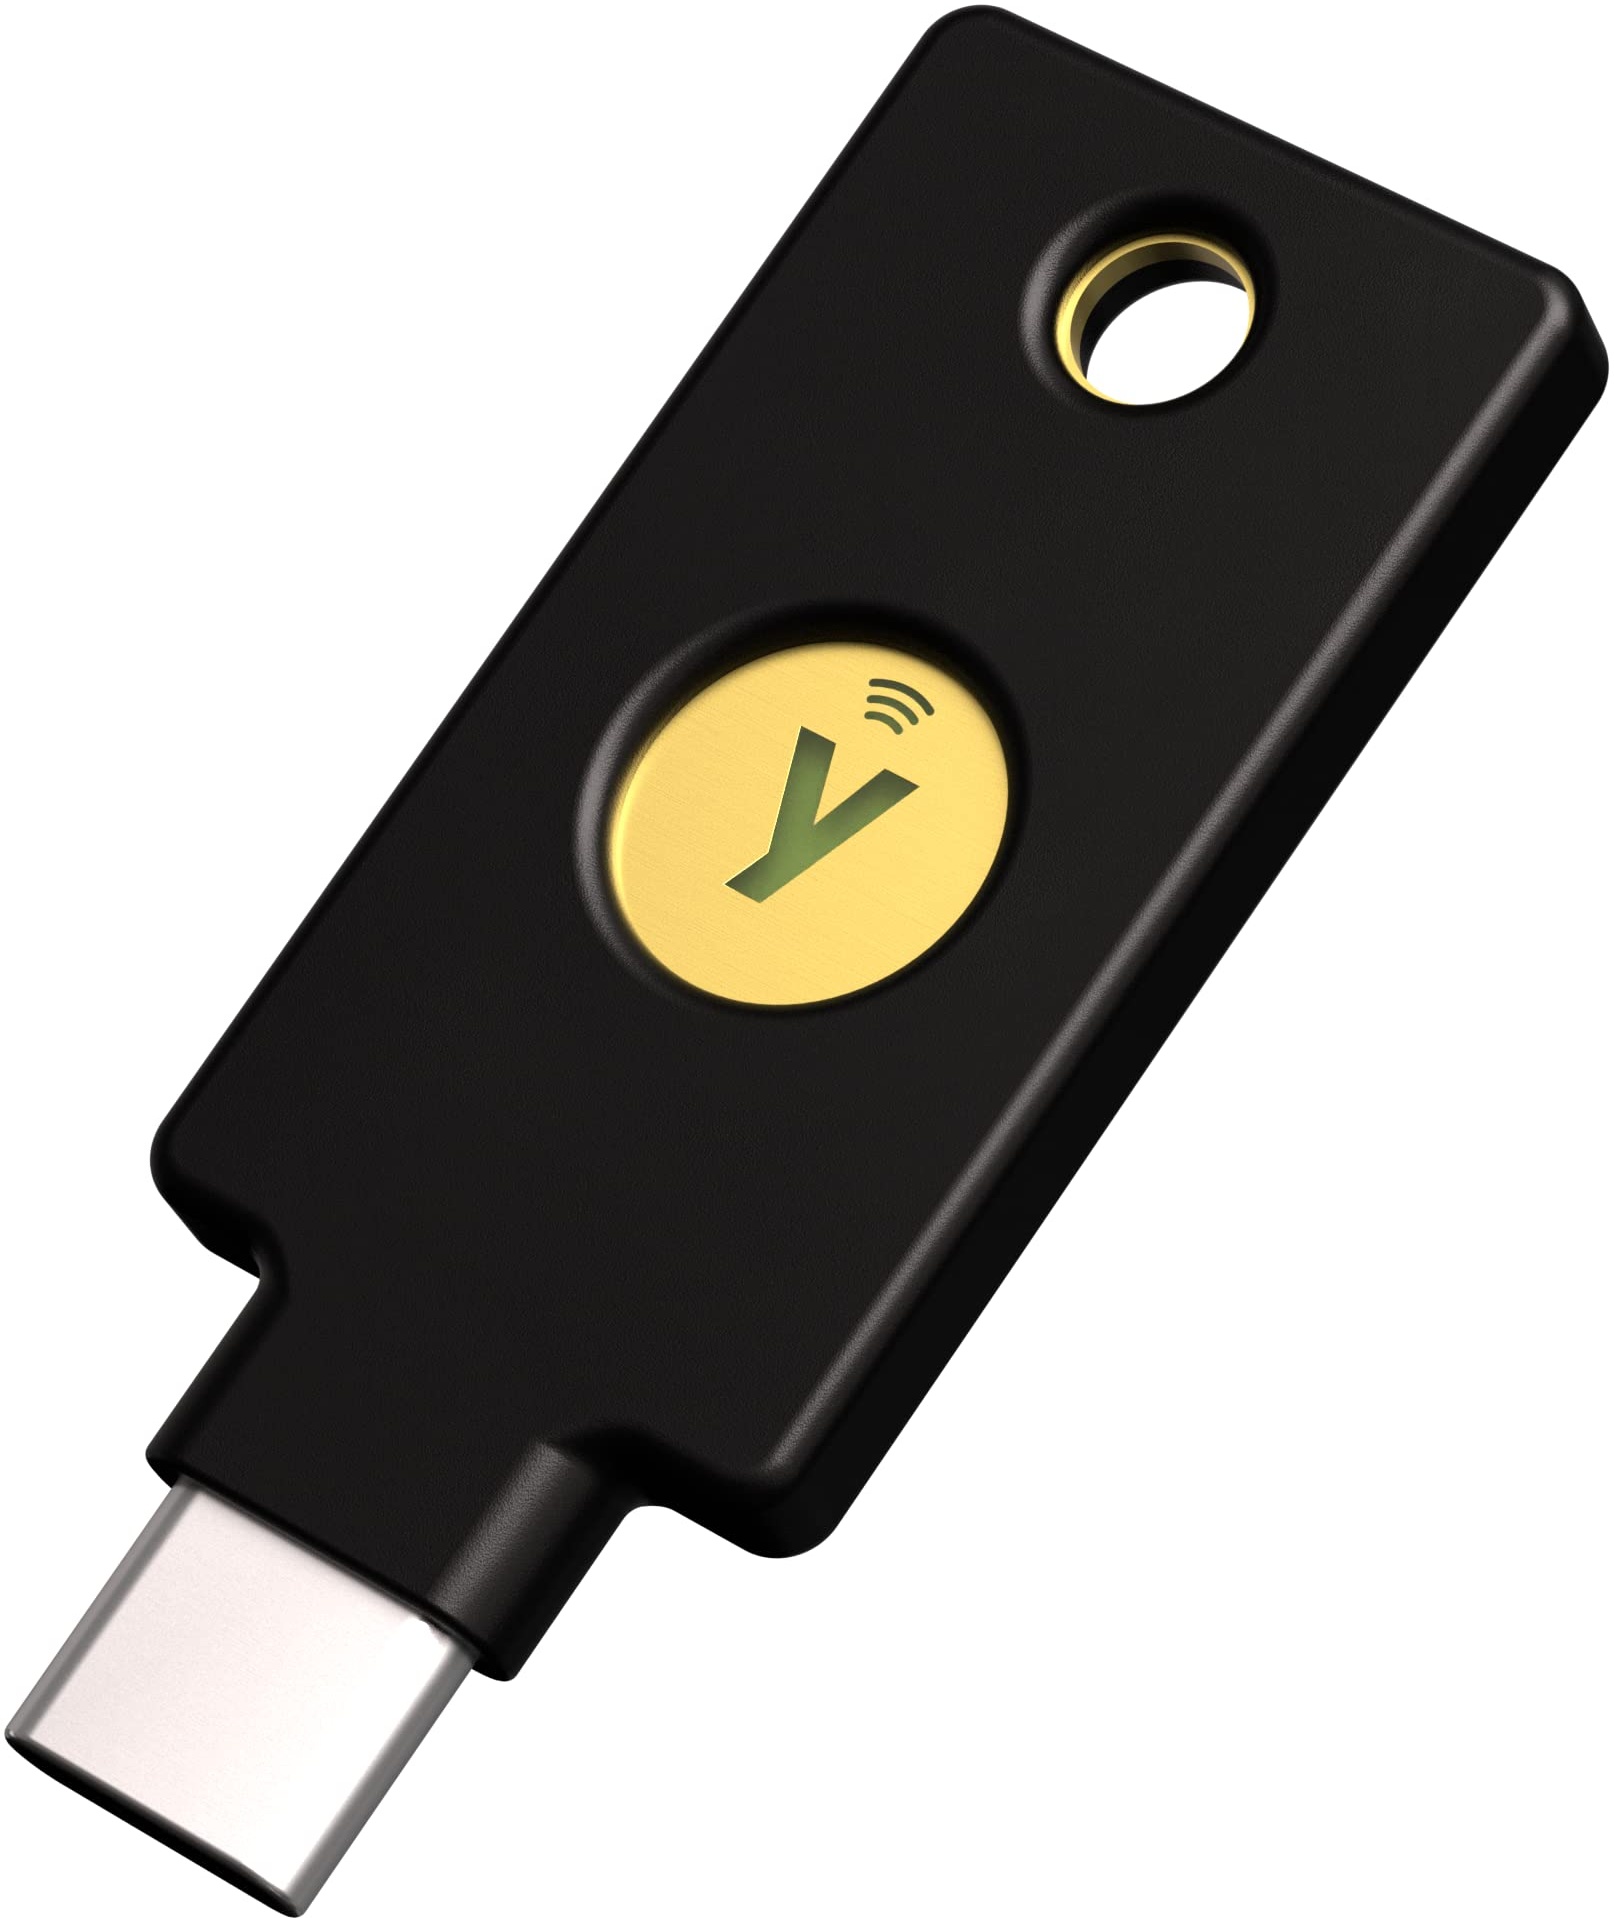 Yubico - YubiKey 5C NFC - Two Factor Authentication Security Key, Fits USB-C Ports and Works with Supported NFC Mobile Devices - Protect Your Online Accounts with More Than a Password